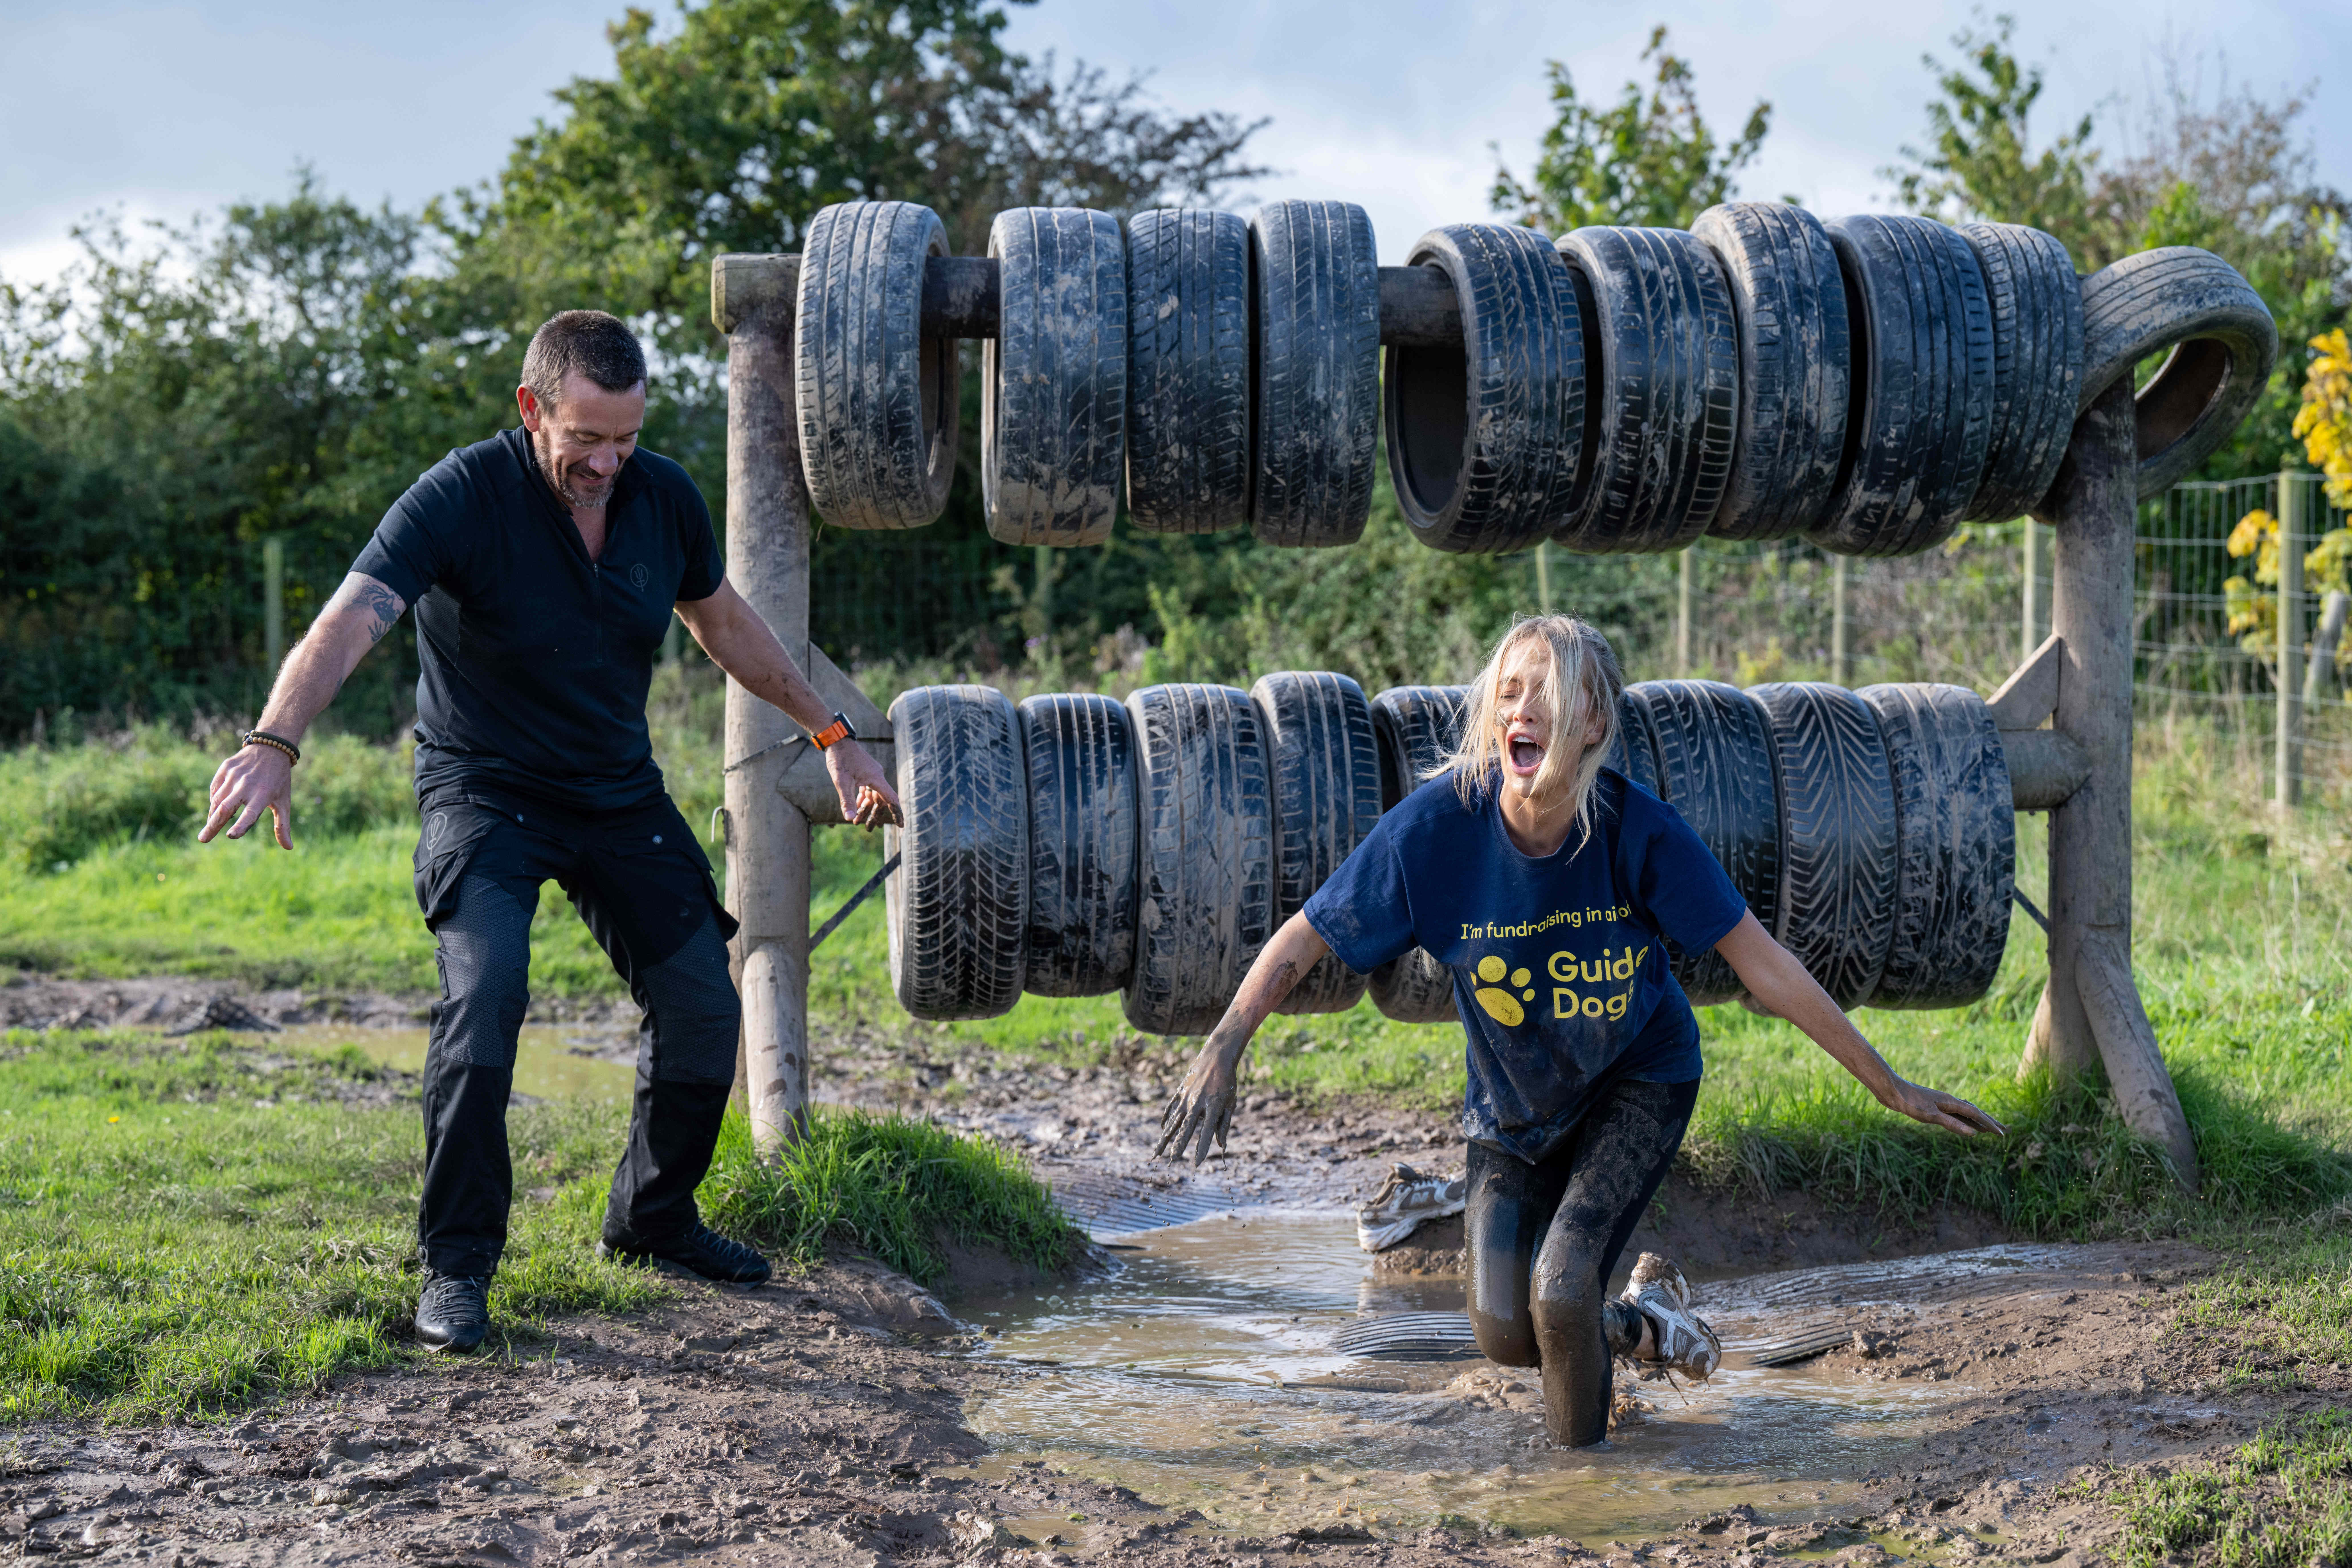 Faye Winter runs through muddy water after climbing over aa wall of tyres as Ollie Ollerton cheers her on. 